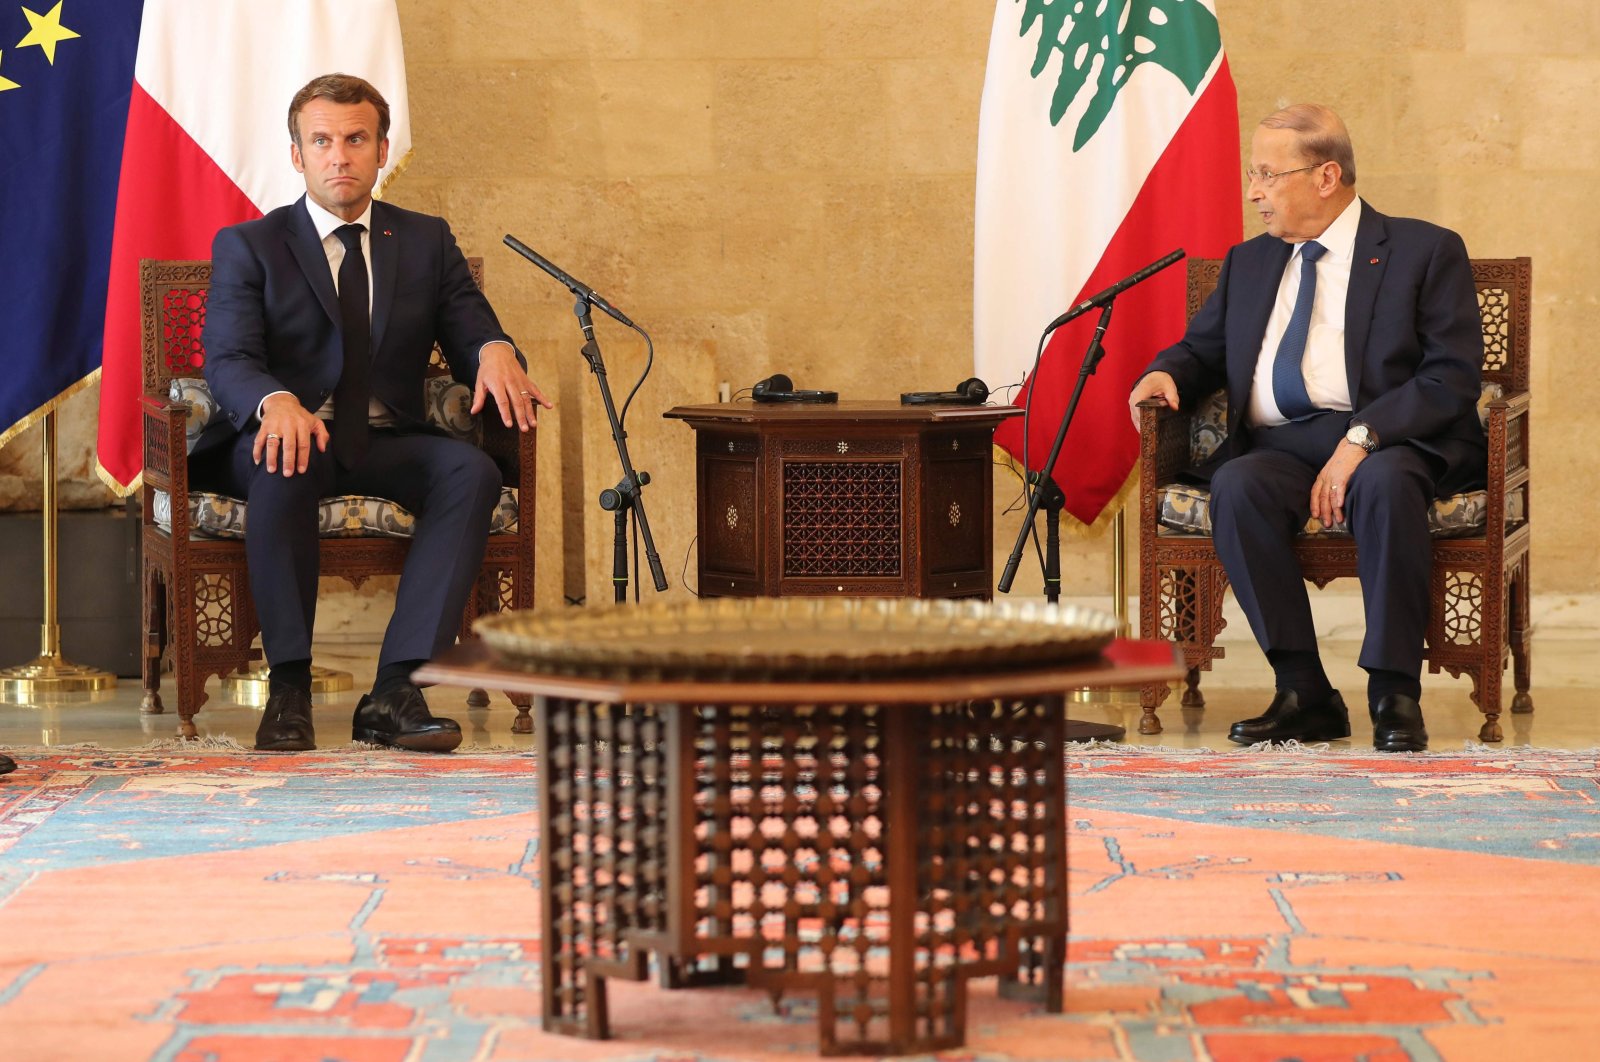 French President Emmanuel Macron (L) meets with Lebanese President Michel Aoun upon his arrival at Beirut airport, Aug. 6, 2020. (AFP Photo)